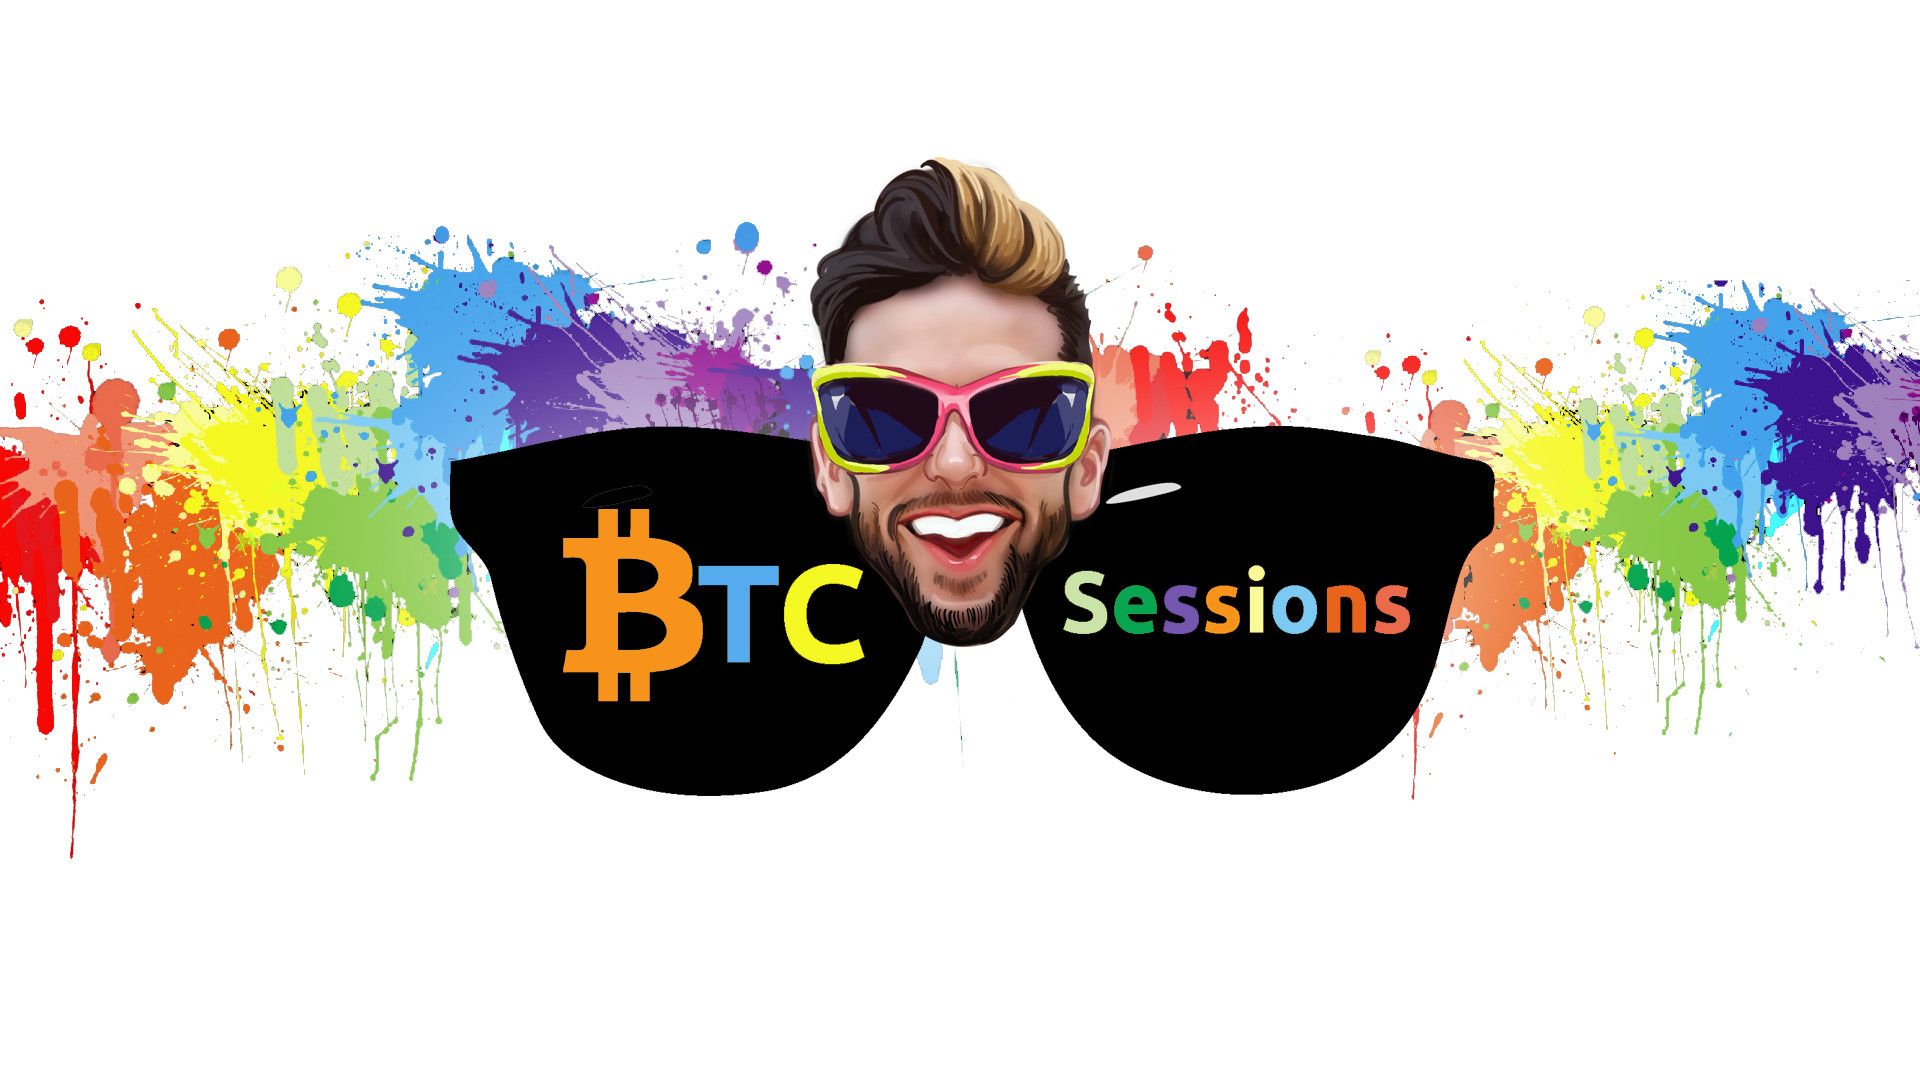 BTC Sessions to Launch New 'Kama Sutra' Video Series to Finally Get You Laid